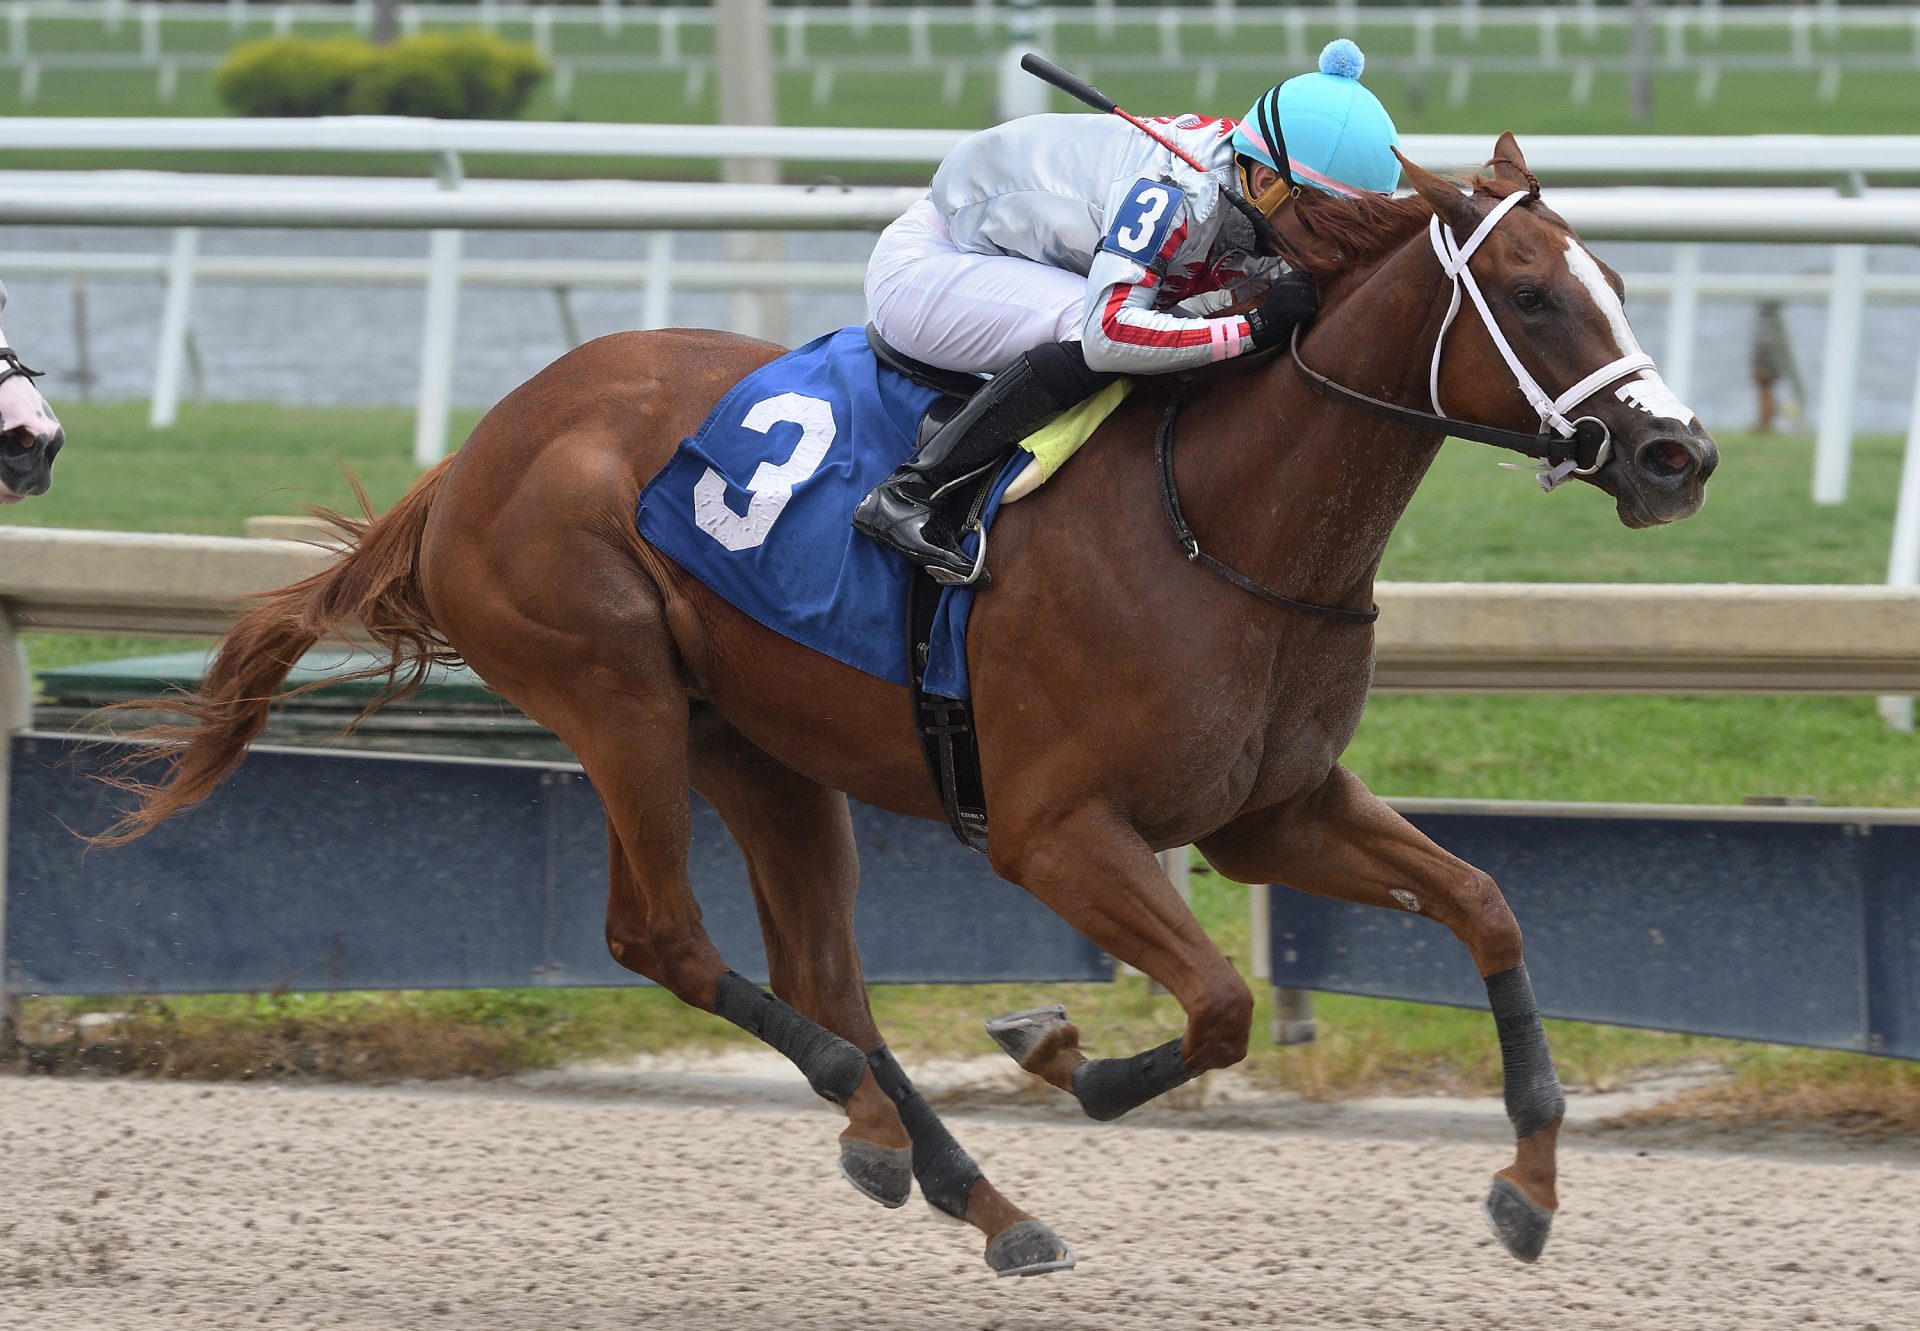 Beauty Queen (Air Force Blue) winning on debut at Gulfstream Park